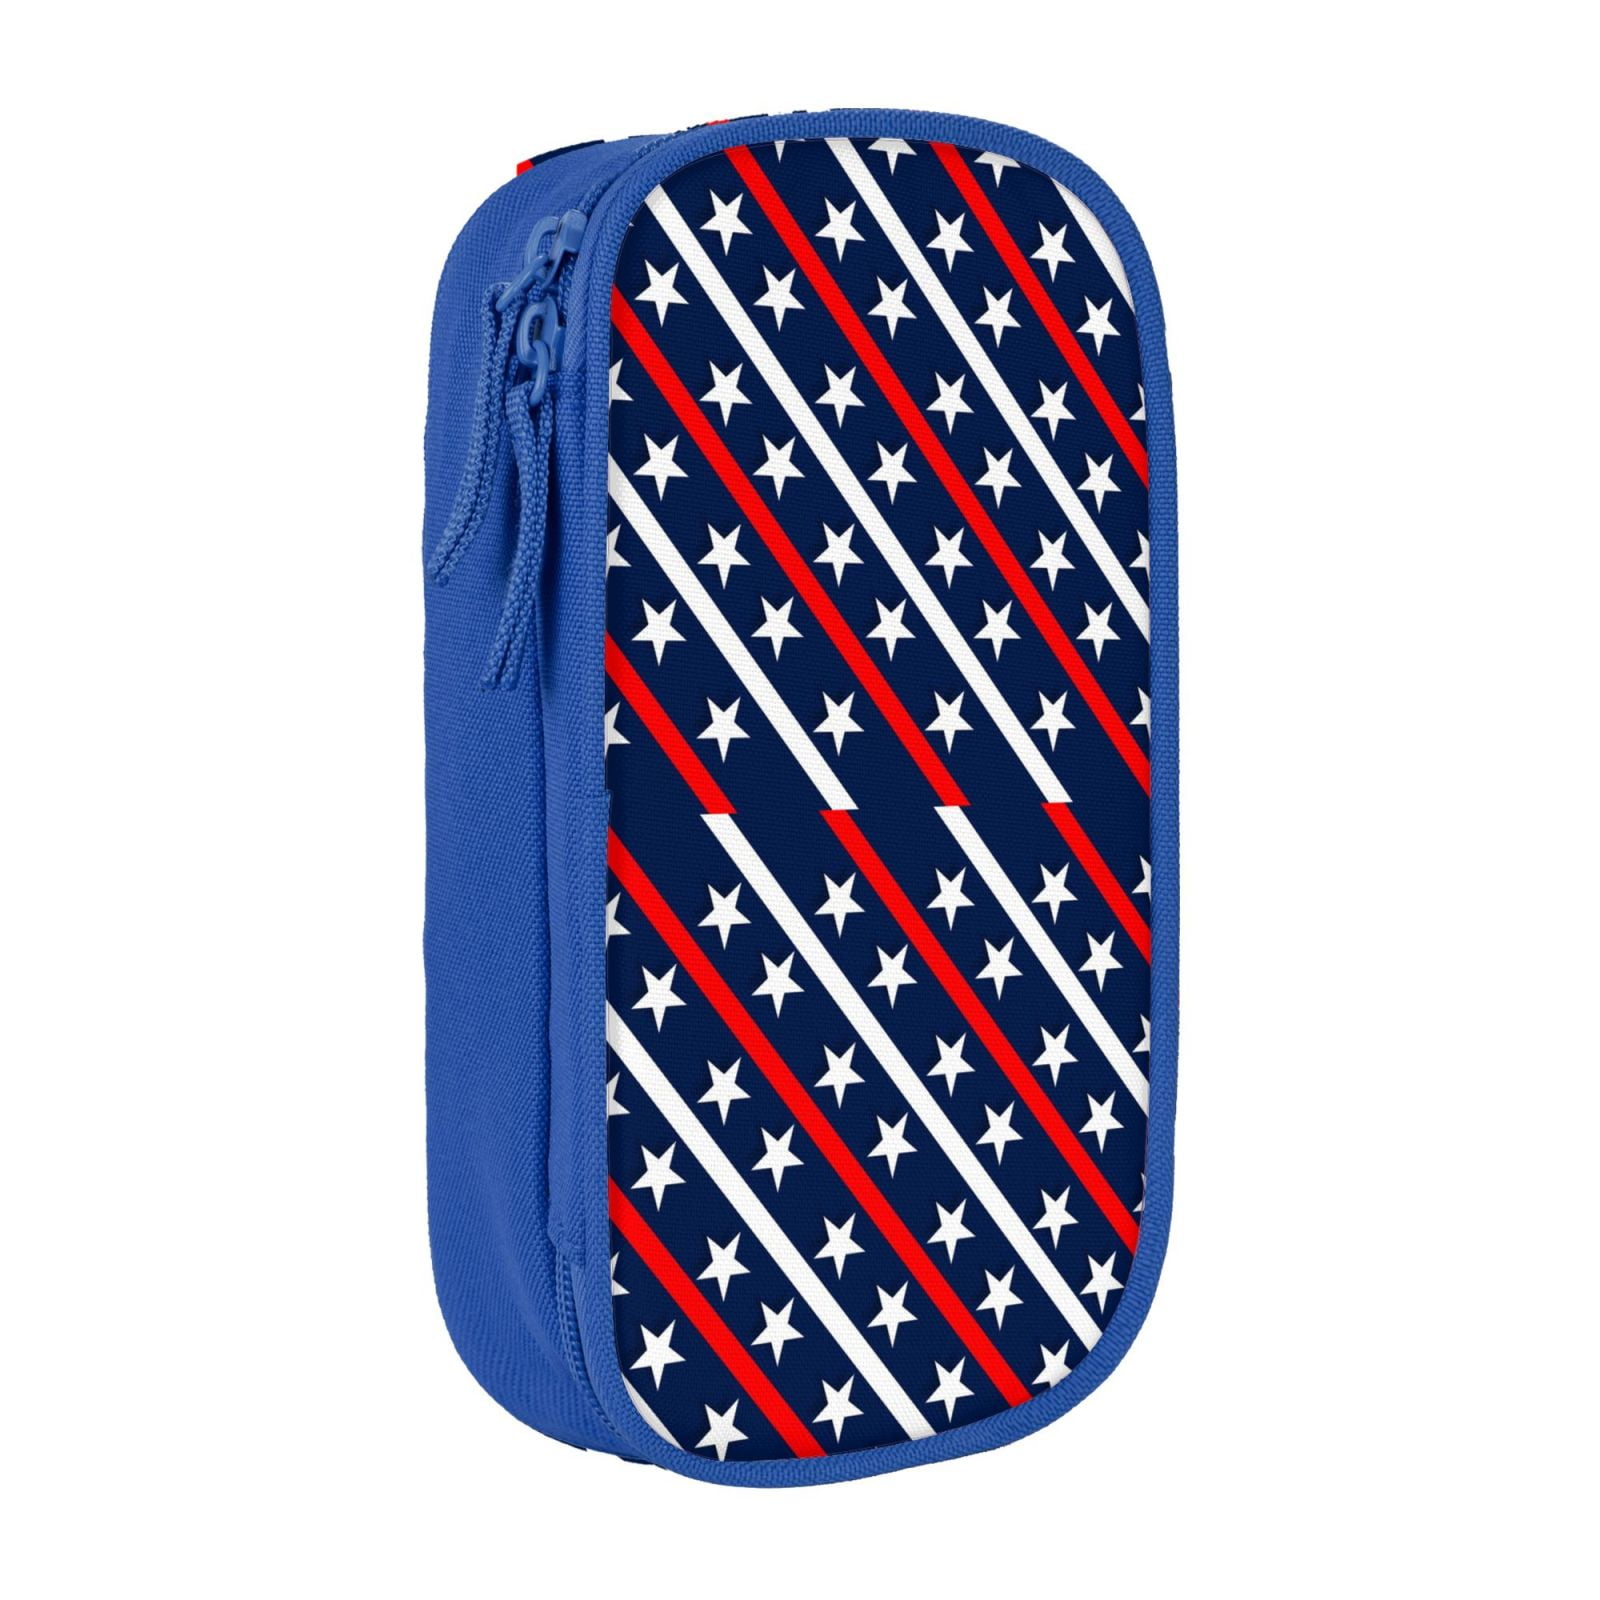 Red Capacity Strips Pencil Compartments Bags Large Case, Patriotic Stars Blue Portable White XMXY with Pencil Blue Zipper